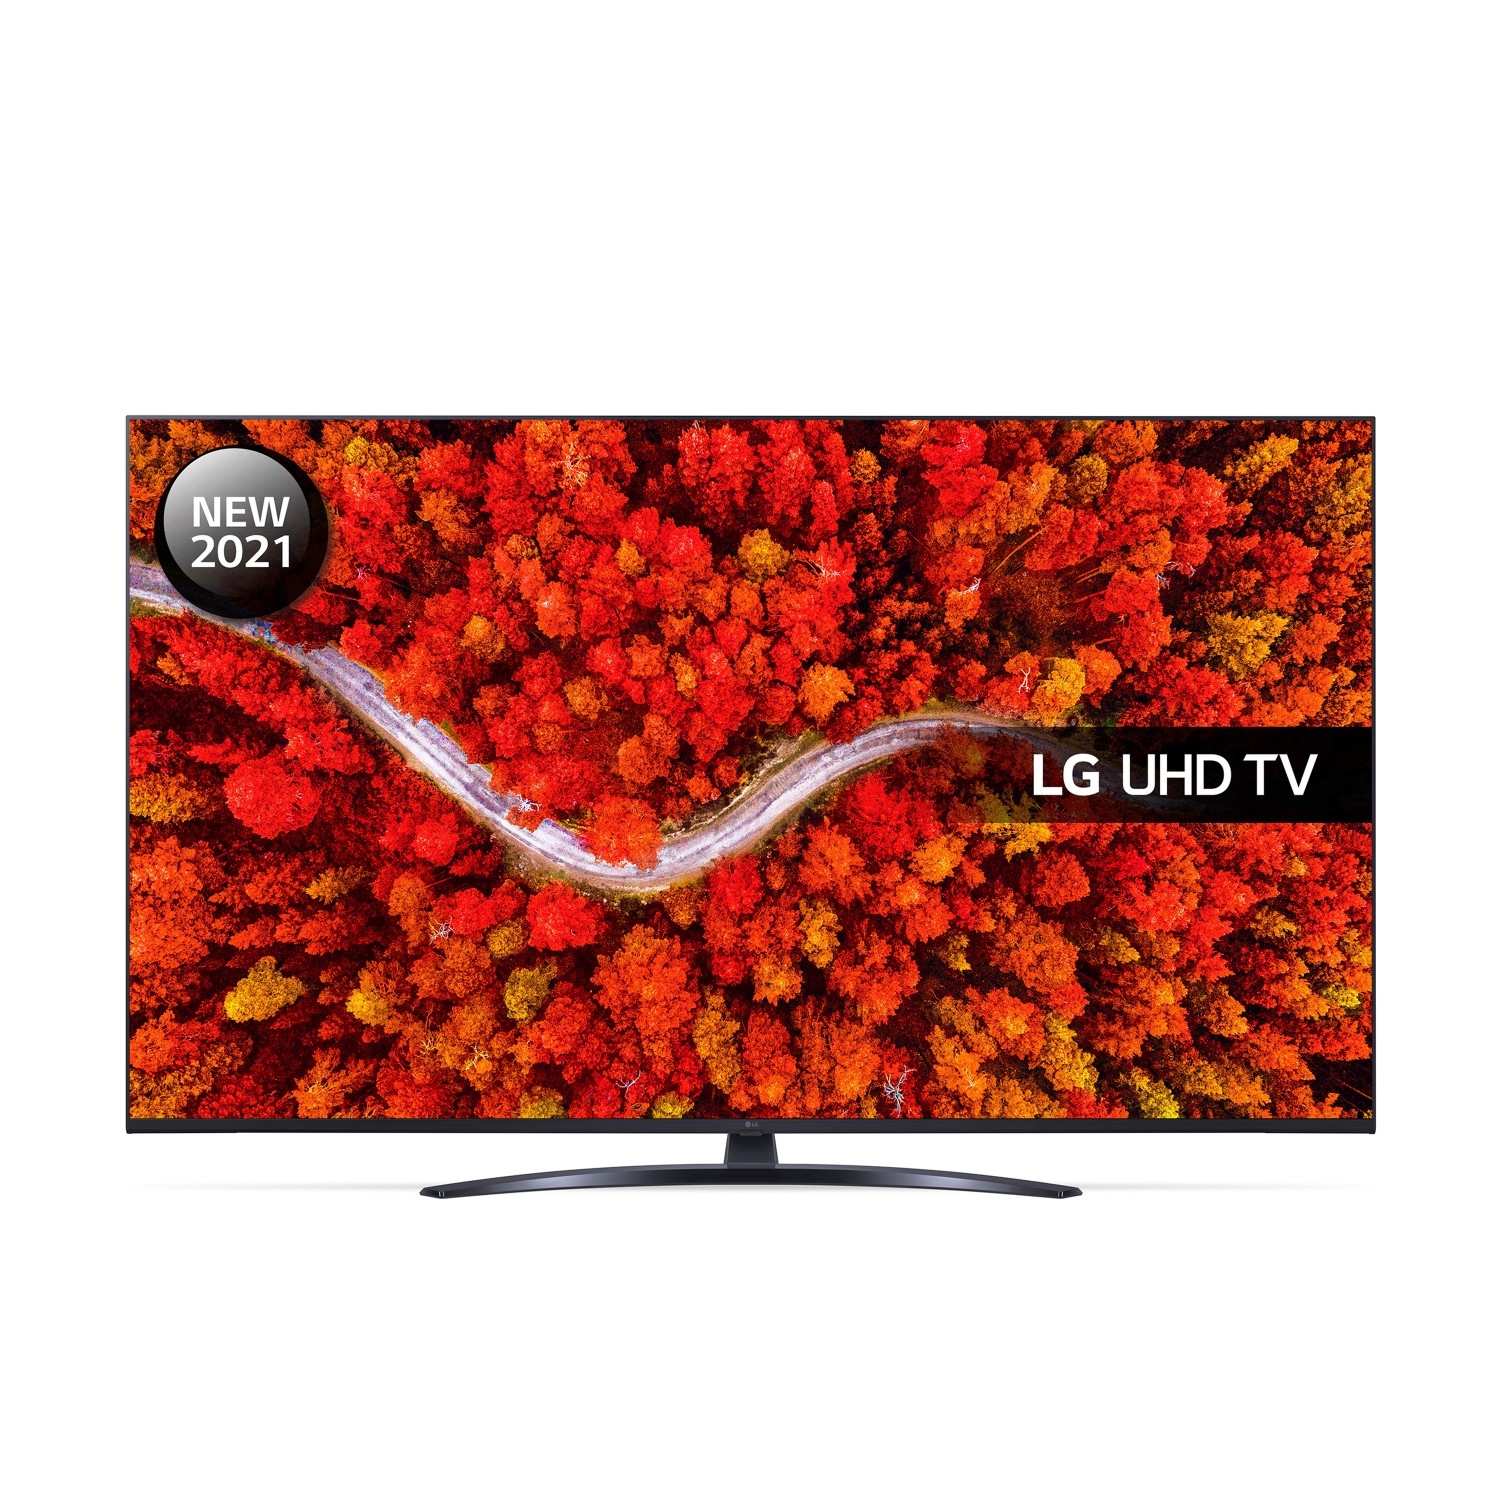 LG 65UP81006LA 65" 4K Ultra HD LED Smart TV with Freeview Play Freesat HD & Voice Assistants - 0